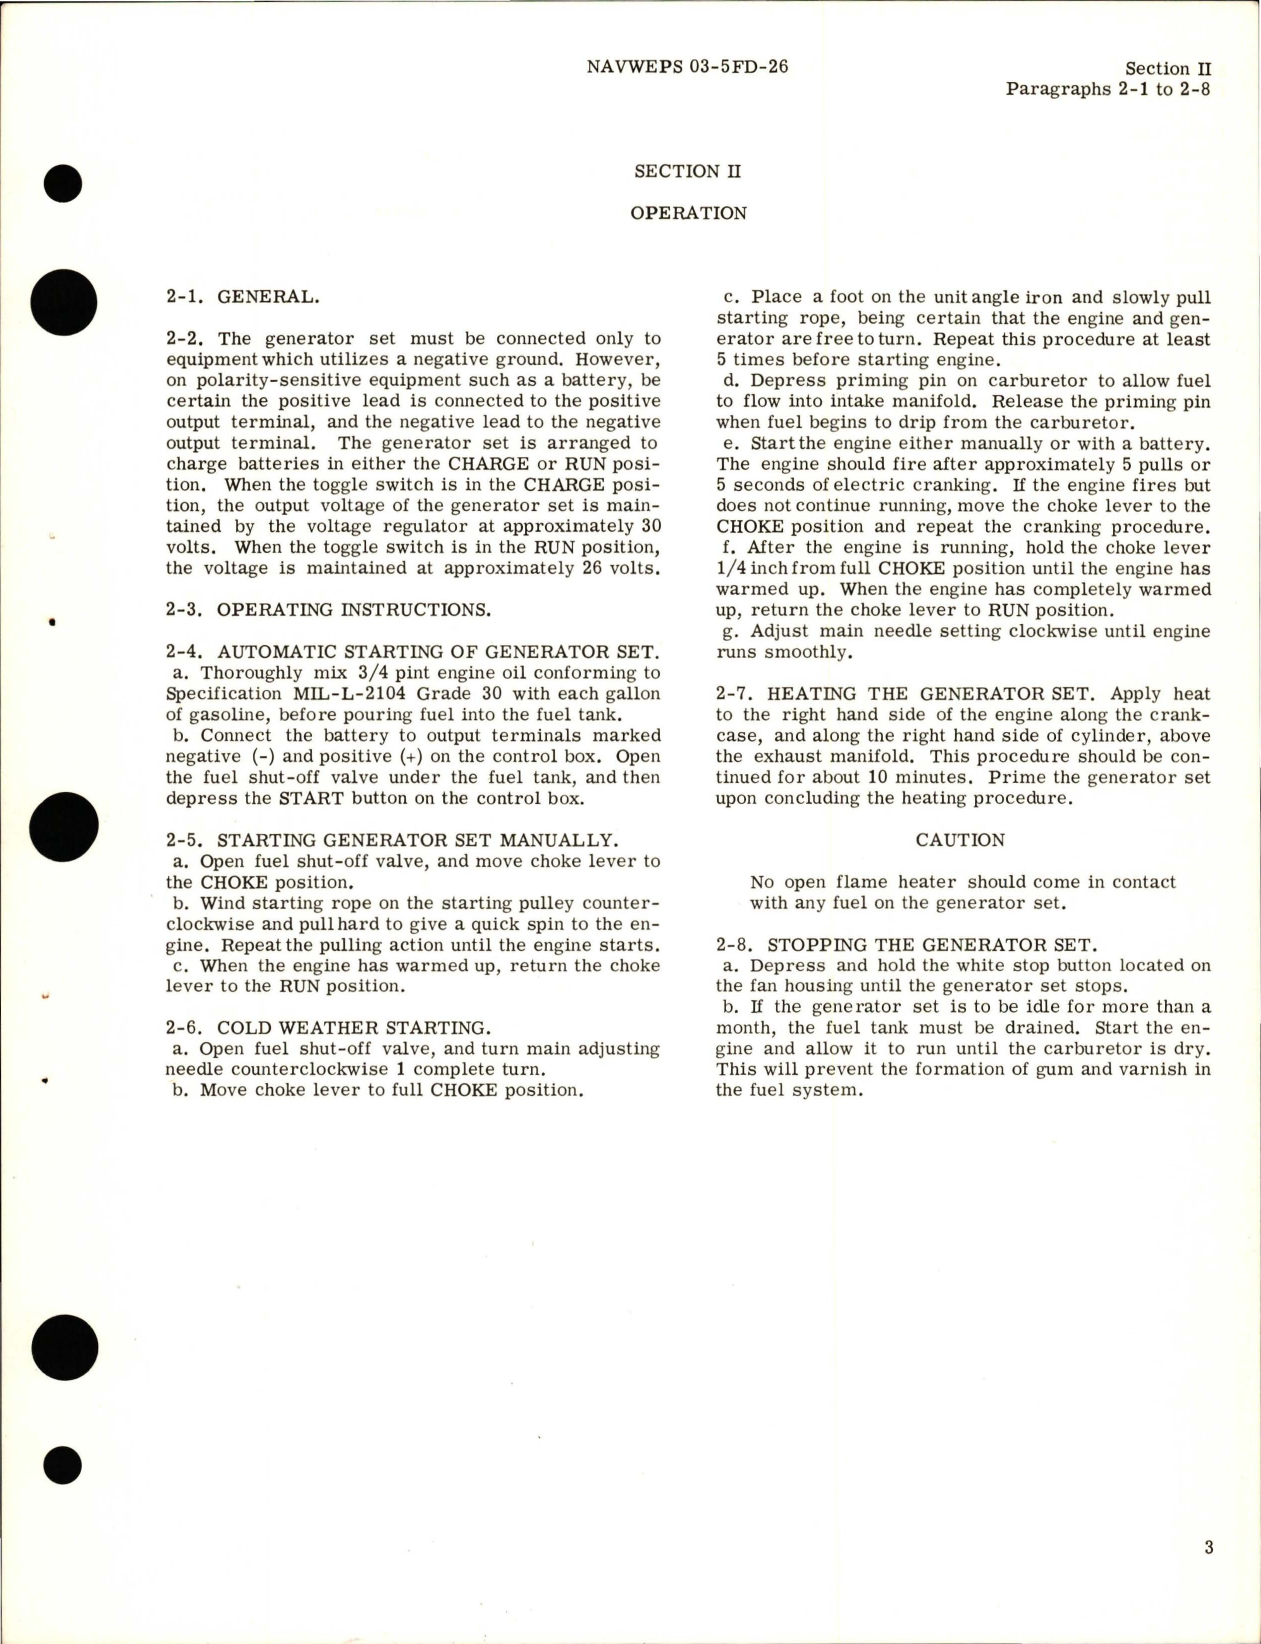 Sample page 7 from AirCorps Library document: Operation and Maintenance Instructions for Generator Set - Models 34D28-4, 34D28-5